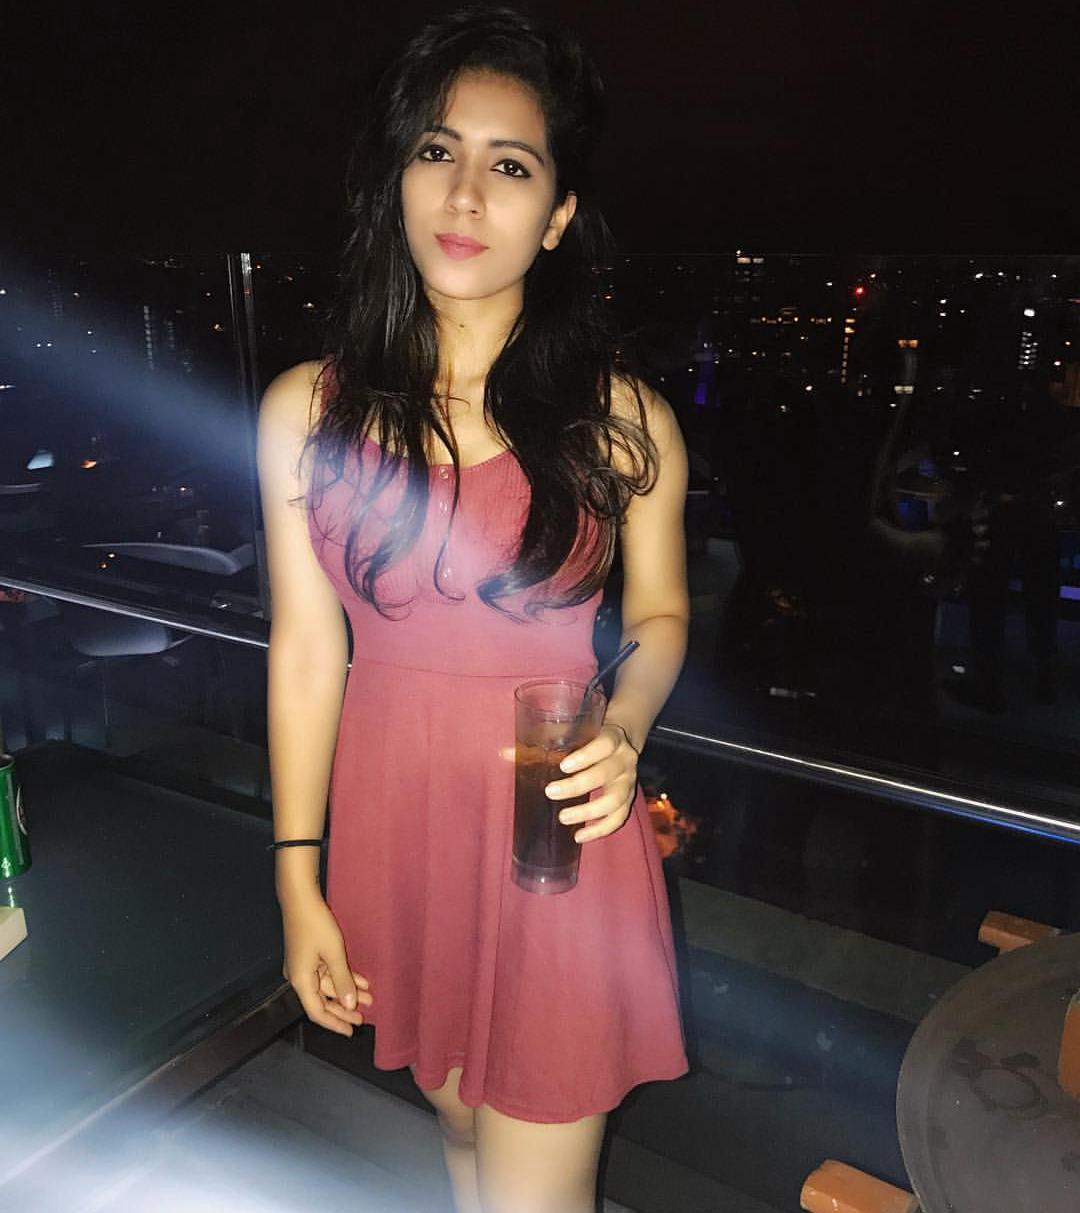 NO ADVANCE HAND TO HAND DIRECT CASH PAYMENT PRIVATE DECENT GIRL BNGLOR